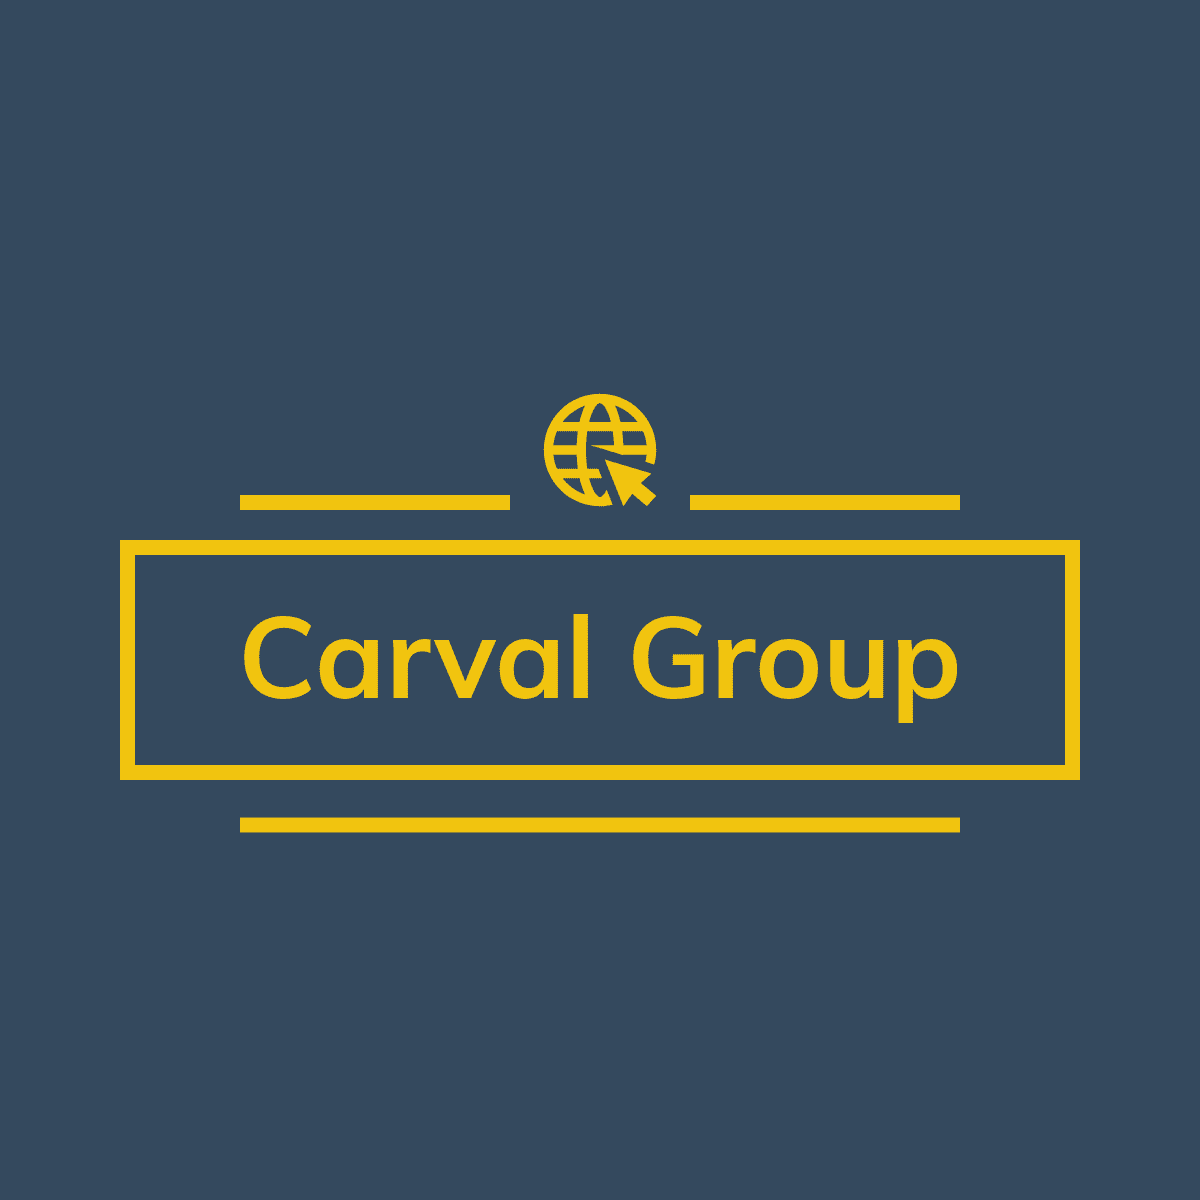 Carval Group